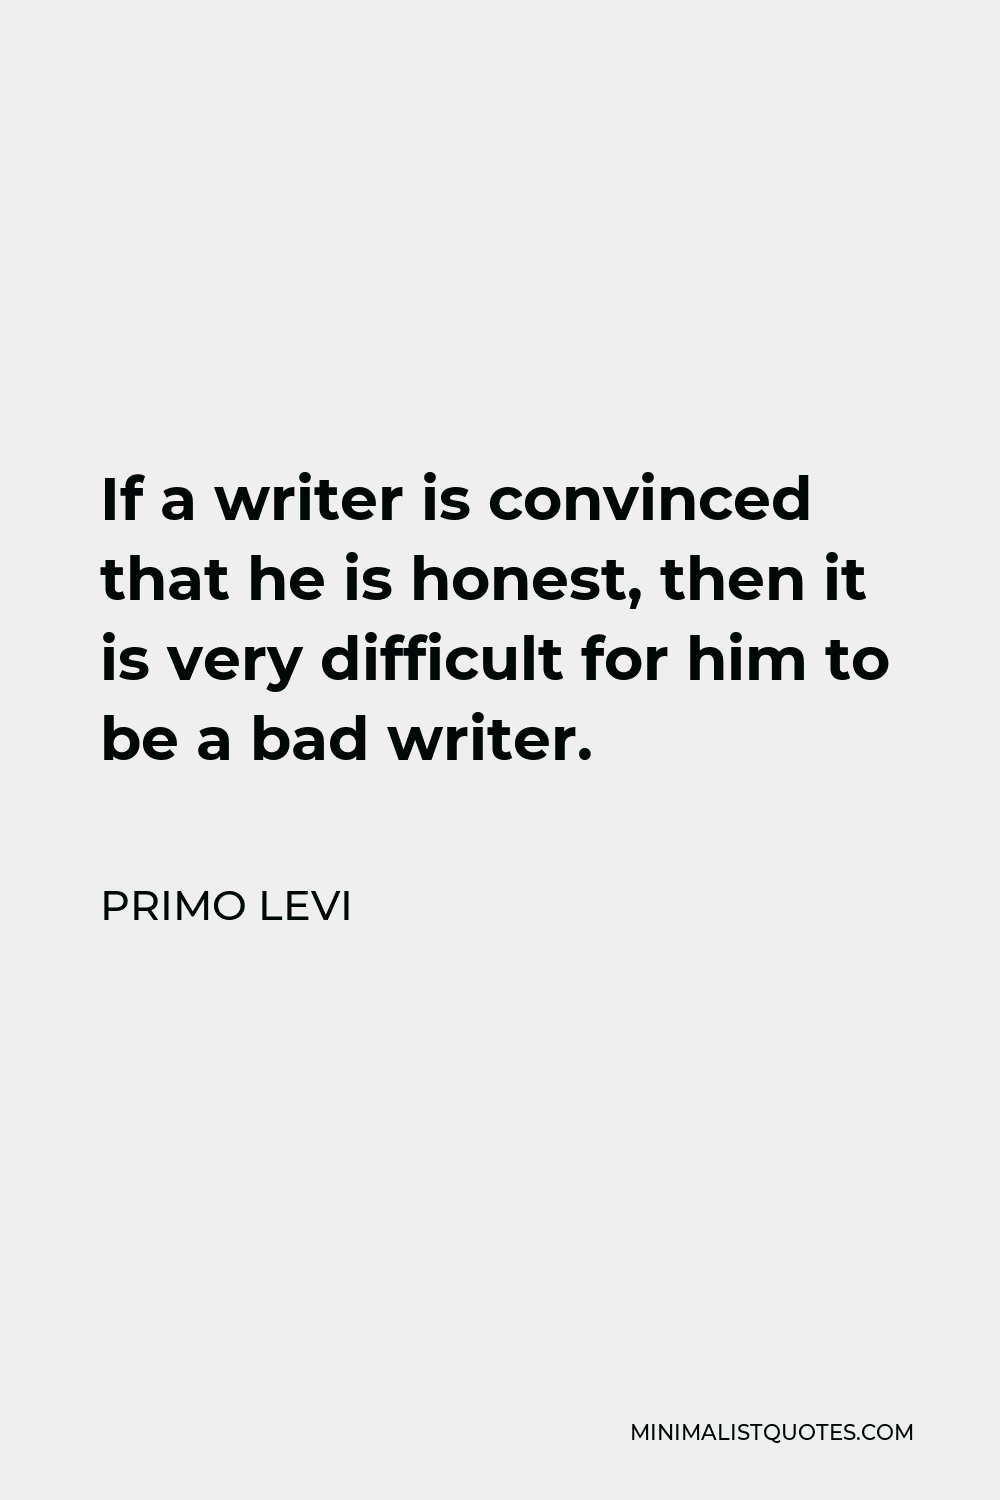 Primo Levi Quote - If a writer is convinced that he is honest, then it is very difficult for him to be a bad writer.